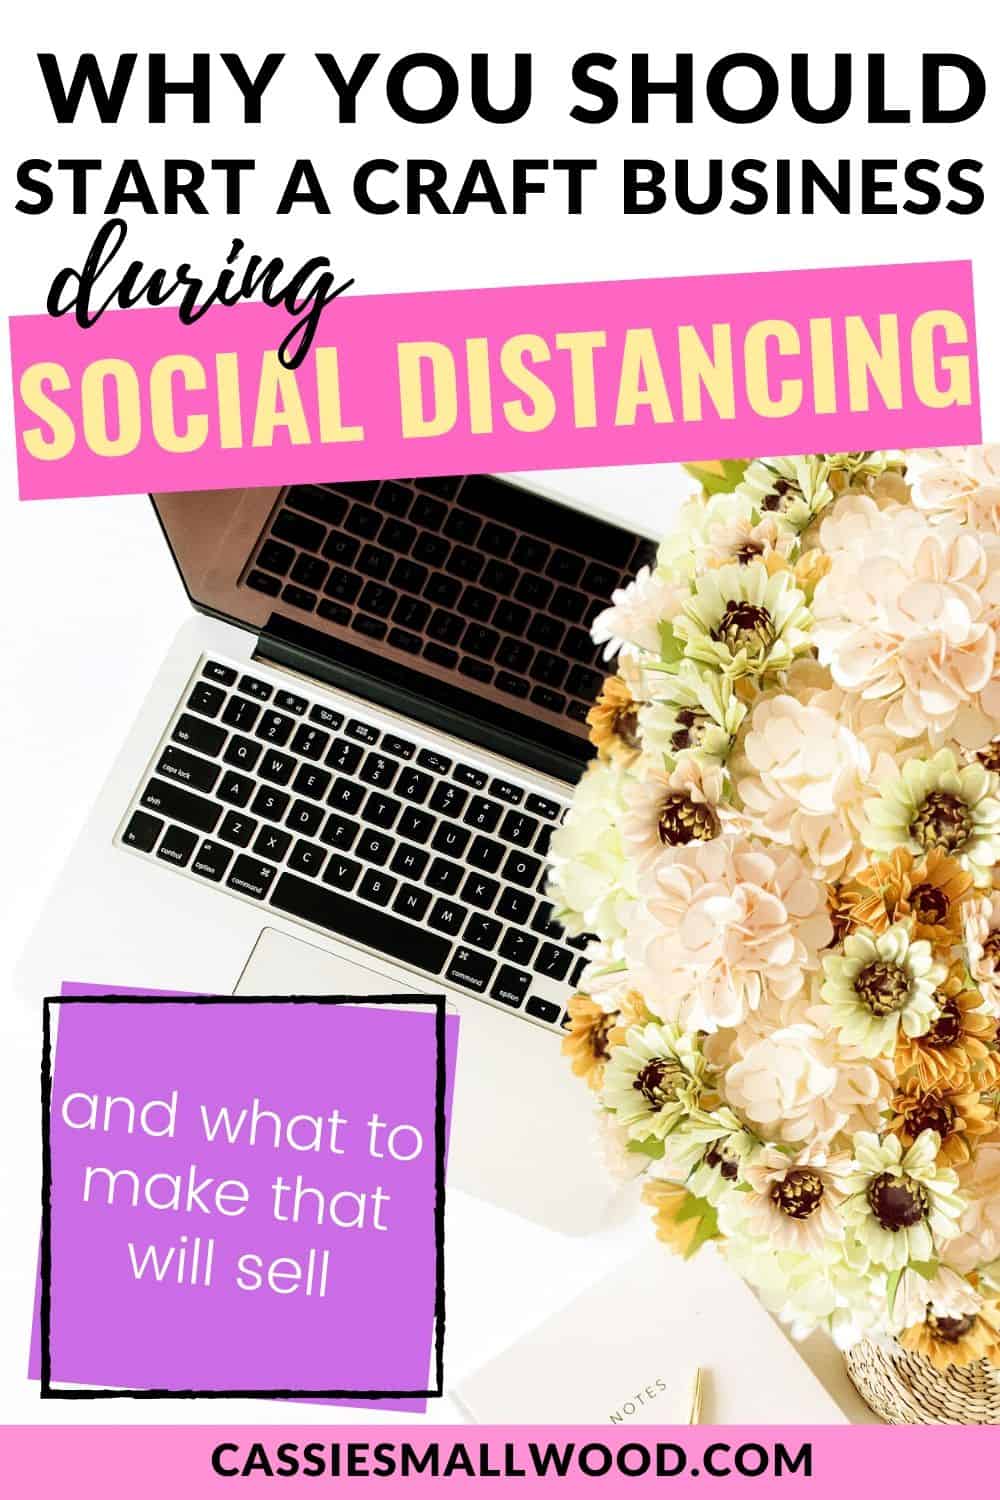 Why you should start a craft business during social distancing